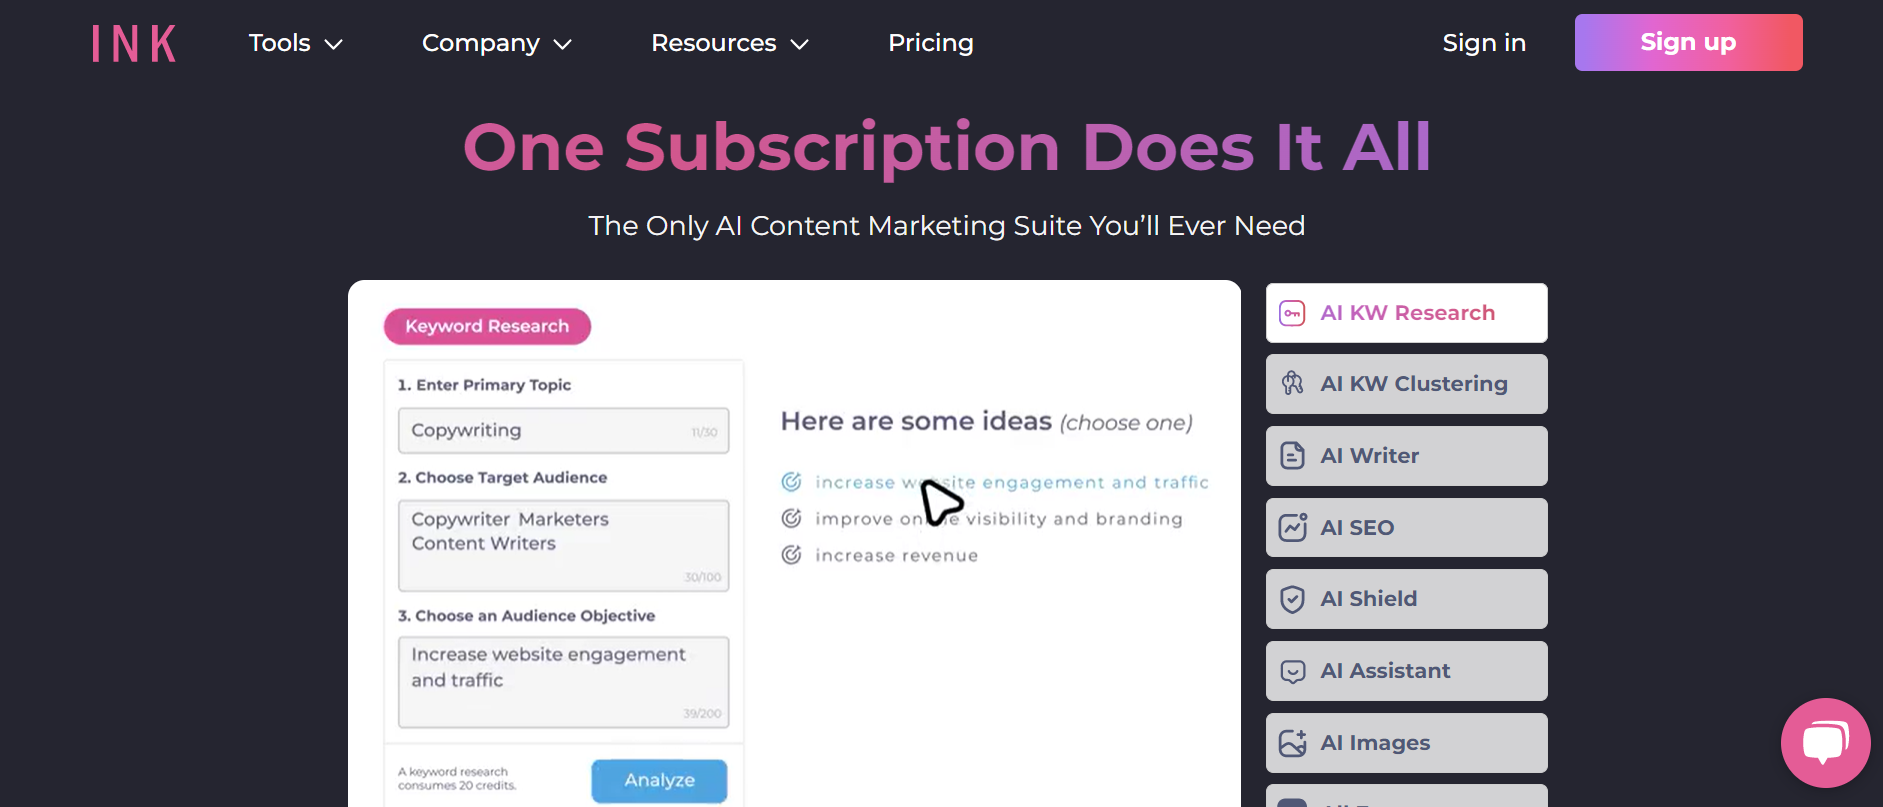 INK for All Landing Page - "One Subscription Does It All" 